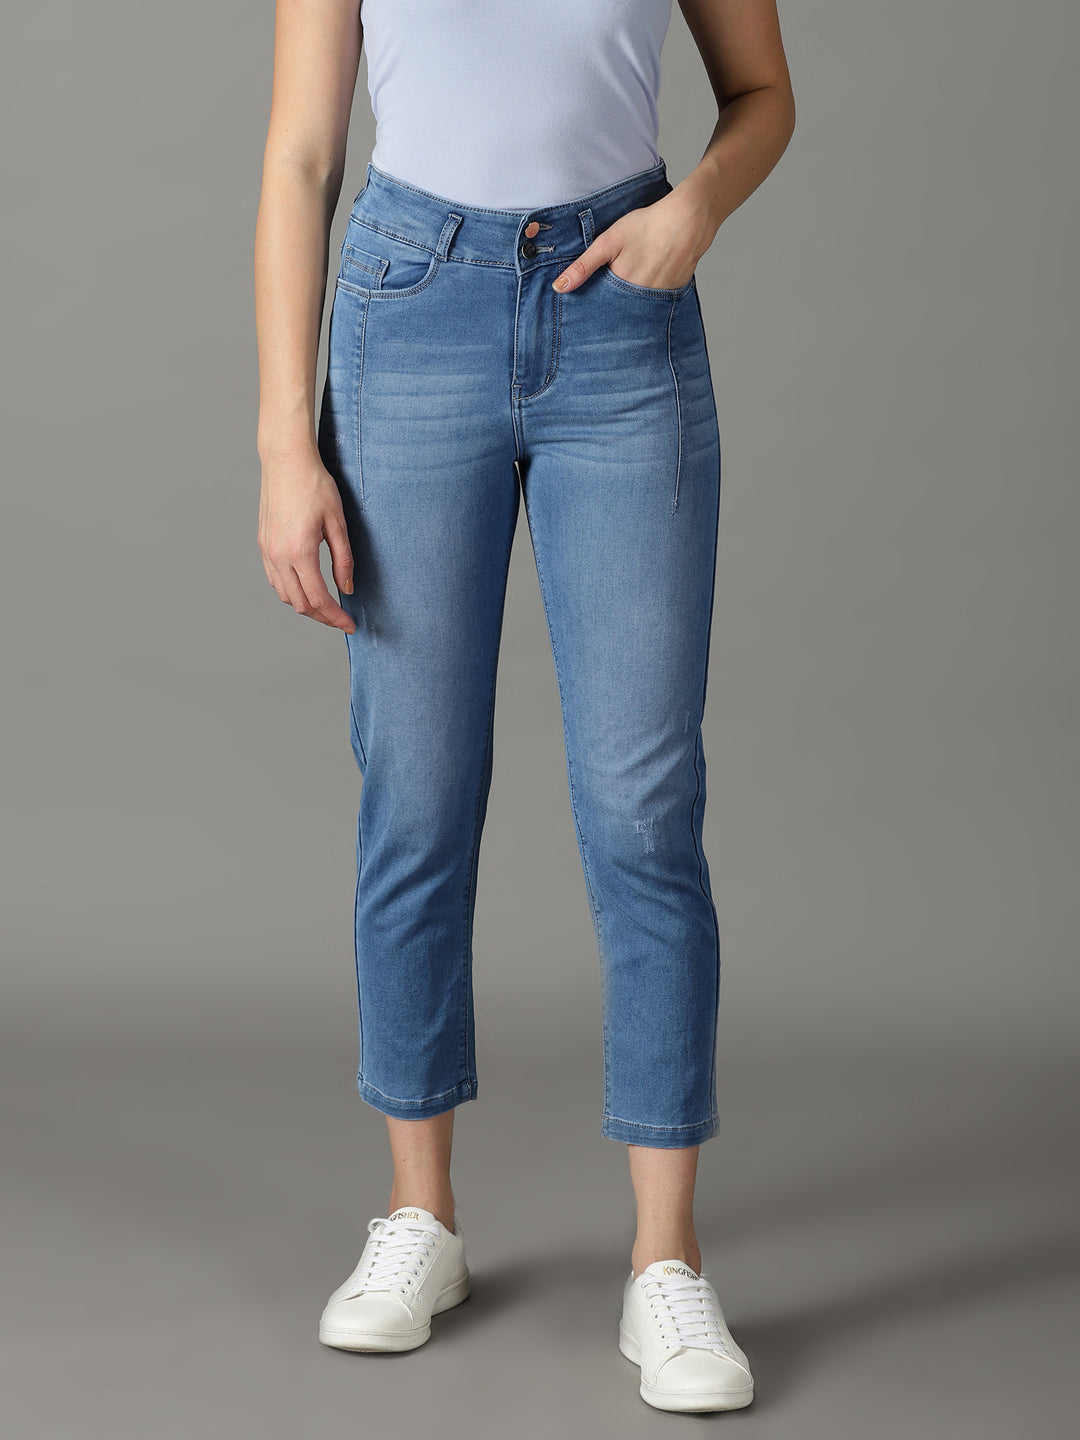 Women Solid Blue Relaxed Fit Denim Jeans